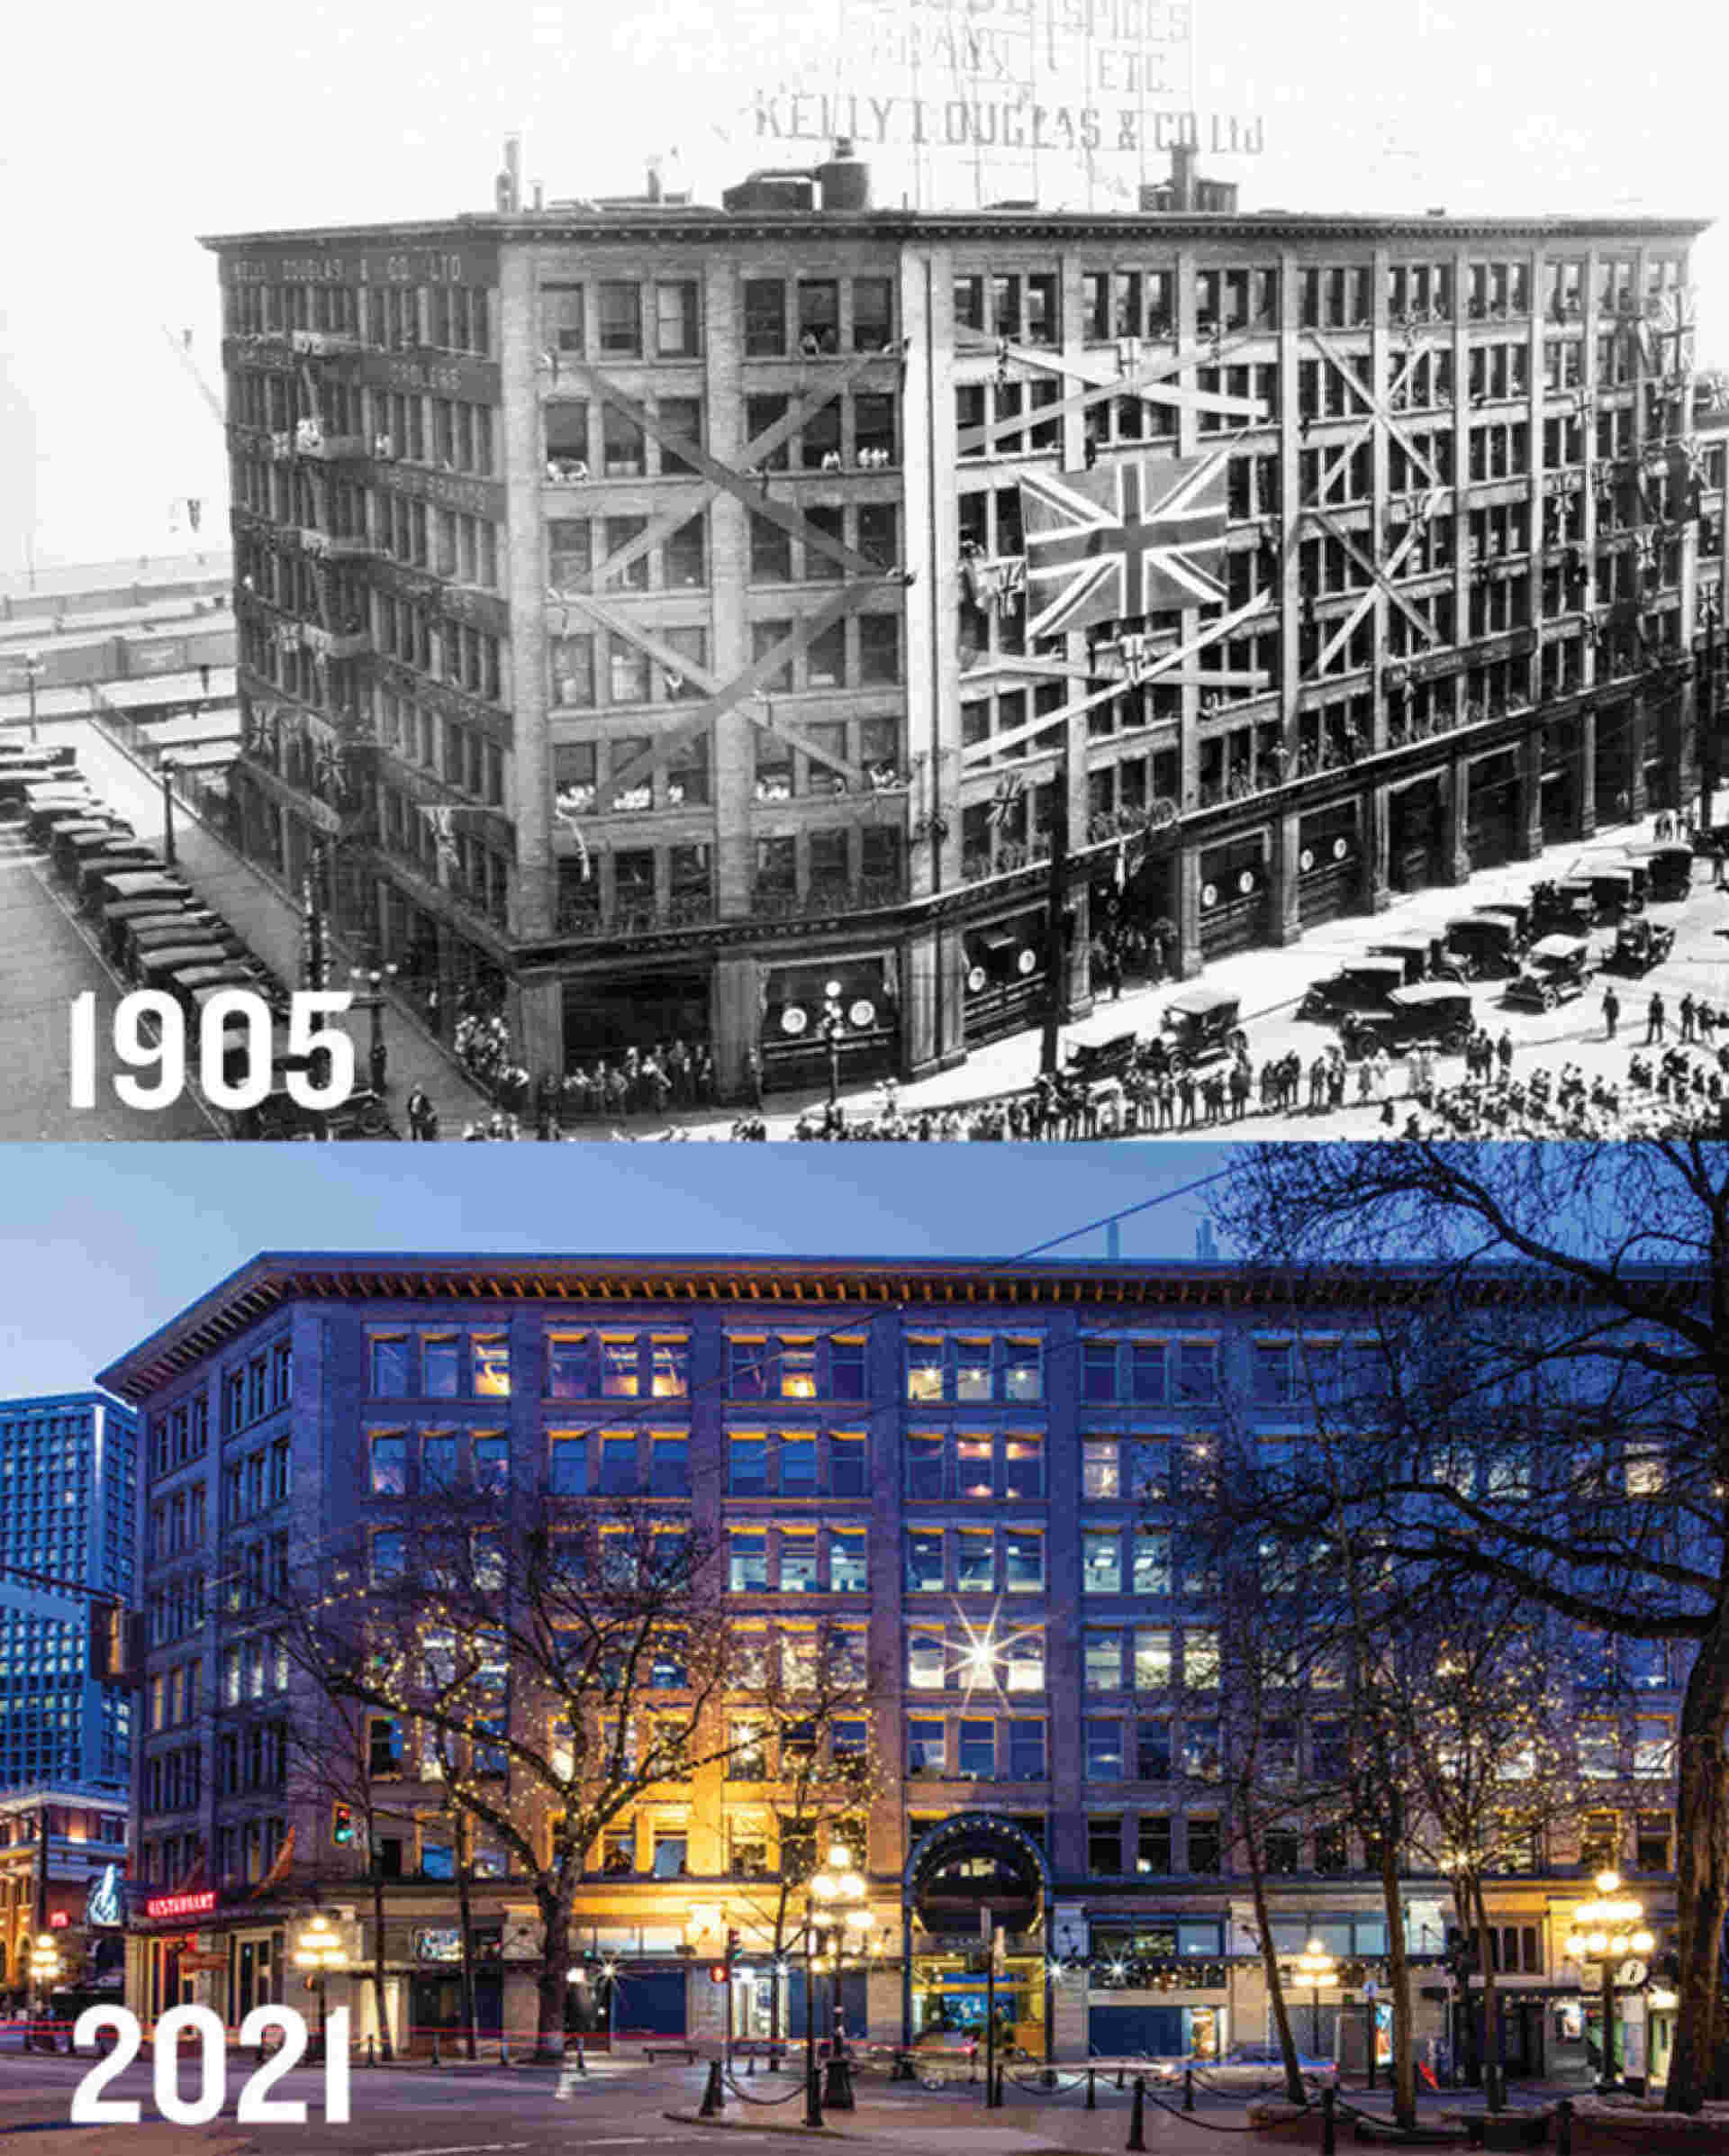 Back to the Future - kelly-douglas-and-co-building-comparision